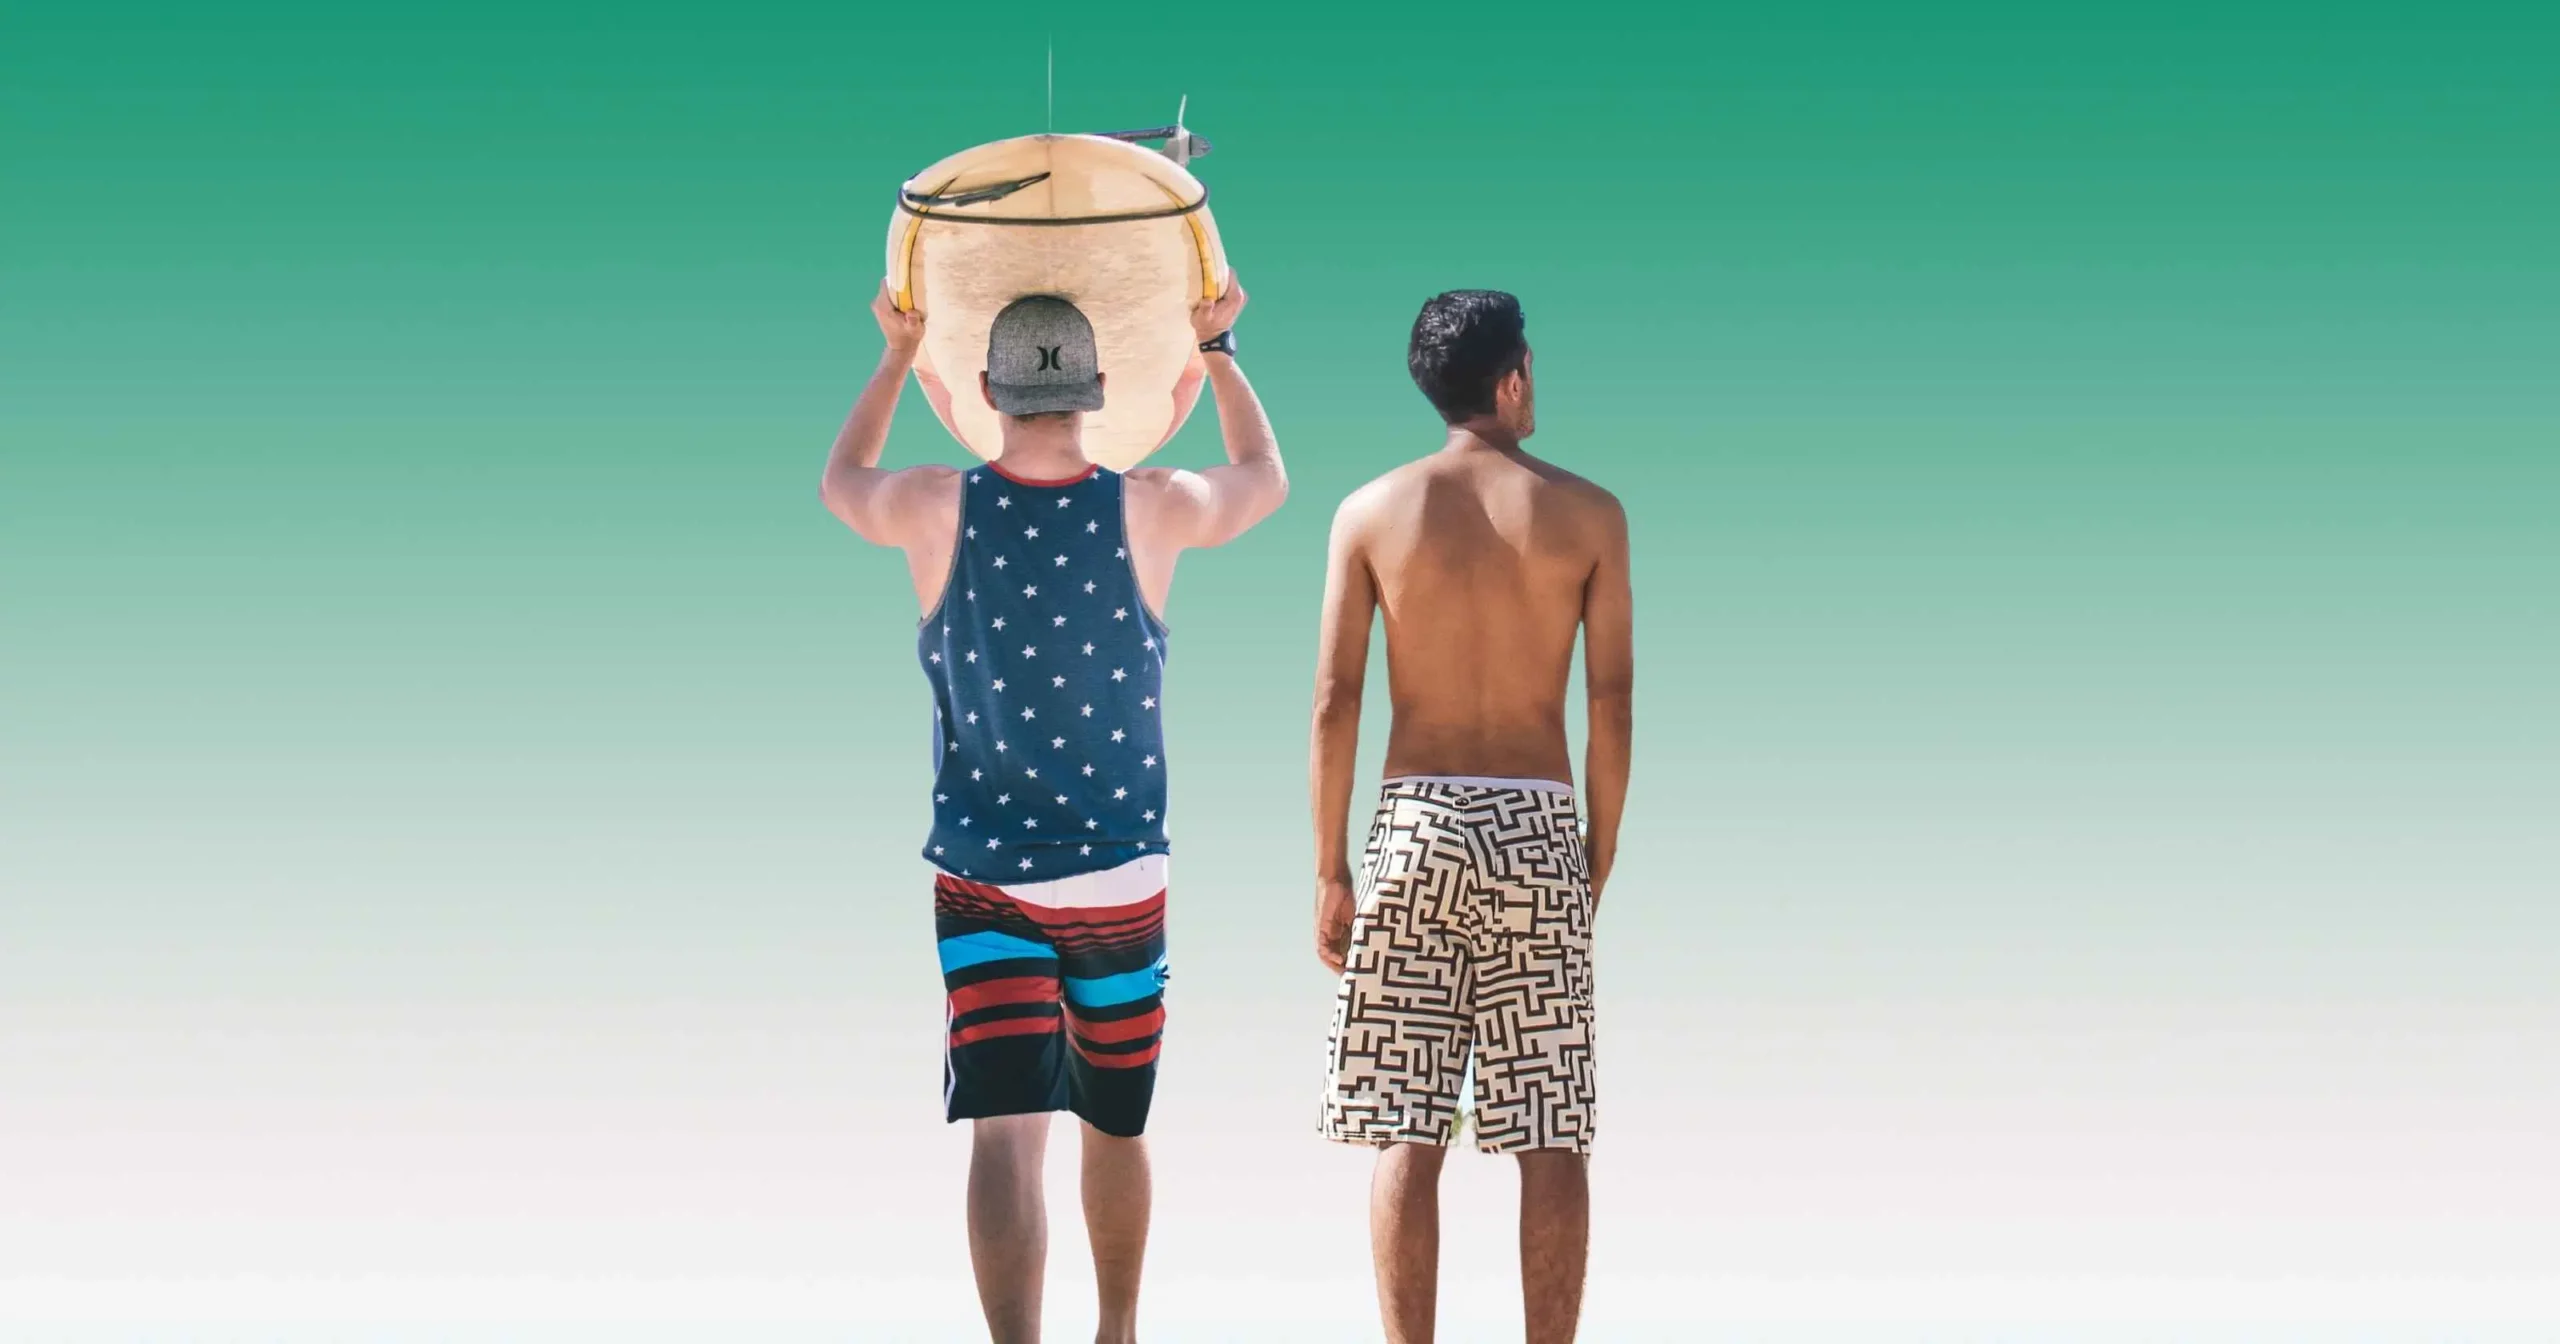 Board Shorts vs Swim Trunks: What’s The Difference?